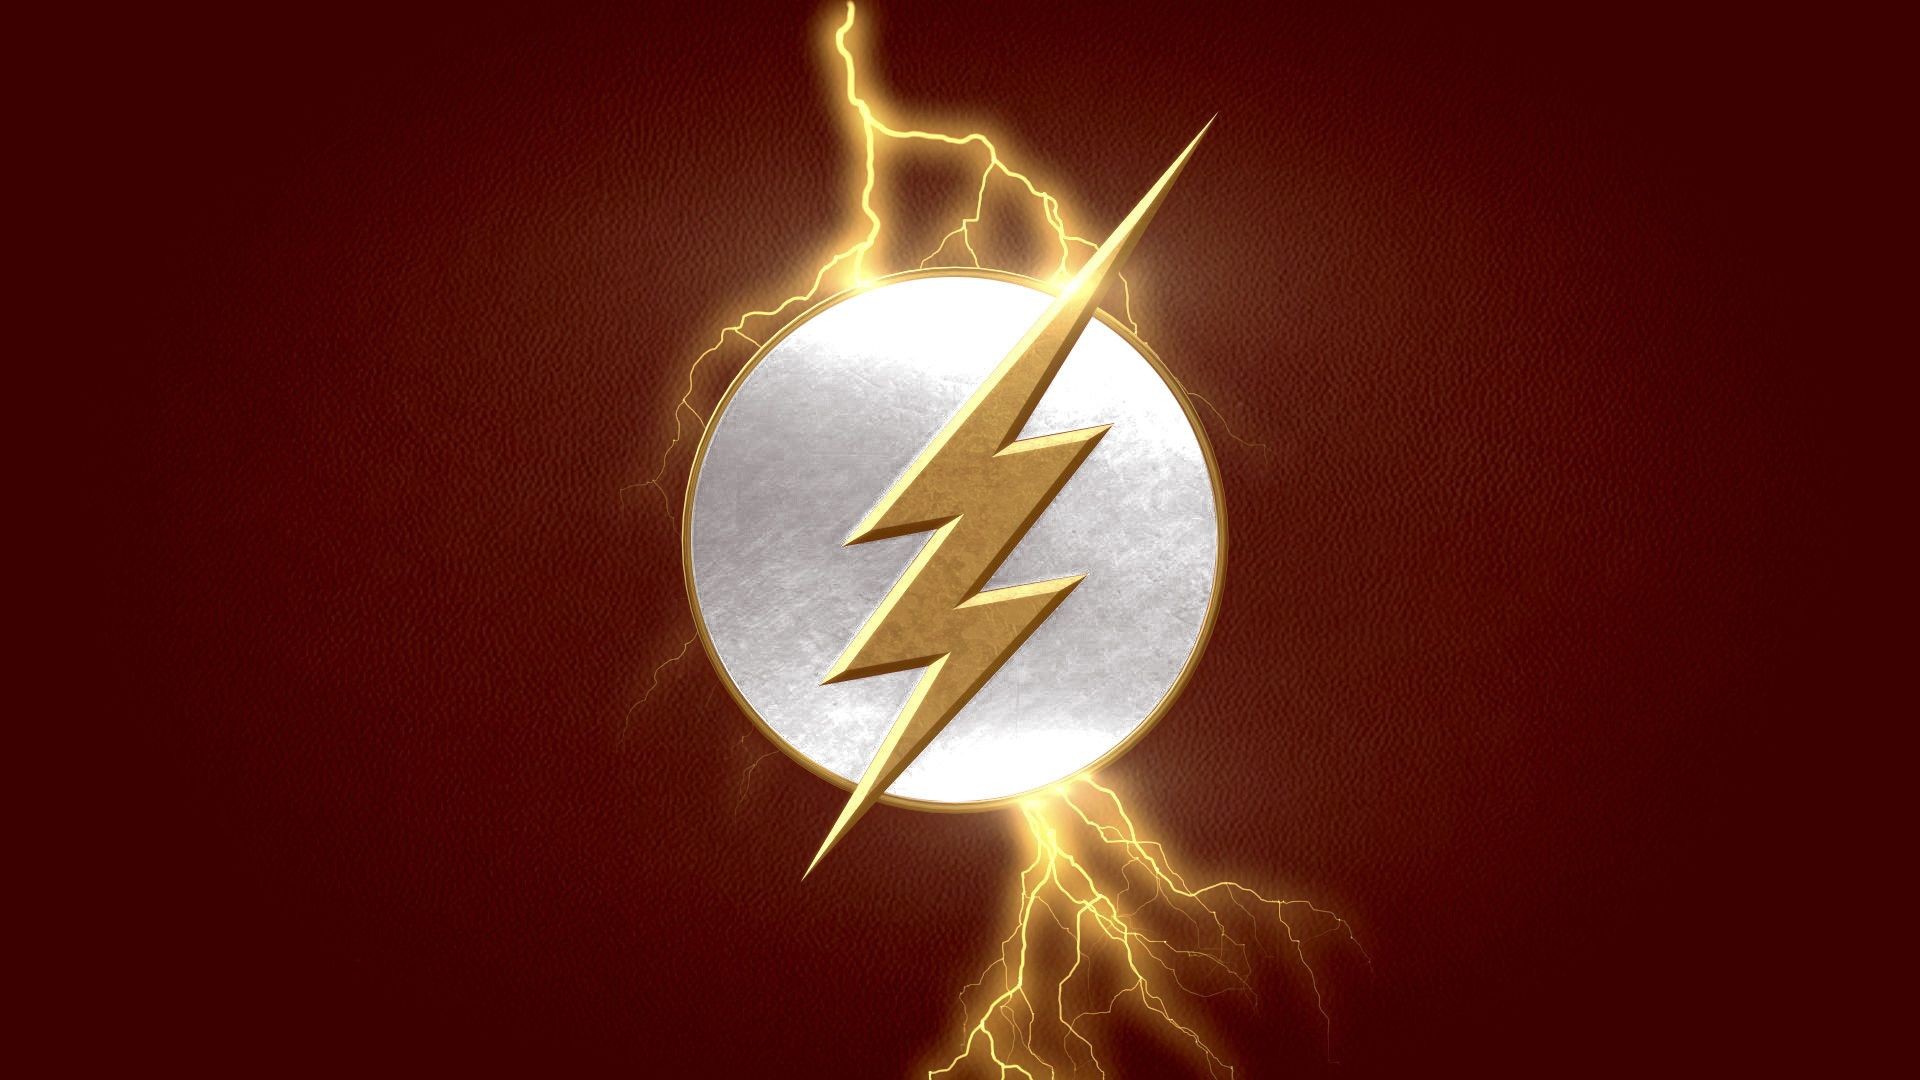 Hd Wallpaper Barry Allen The Flash Computer Wallpapers - Flash Symbol With Lightning - HD Wallpaper 